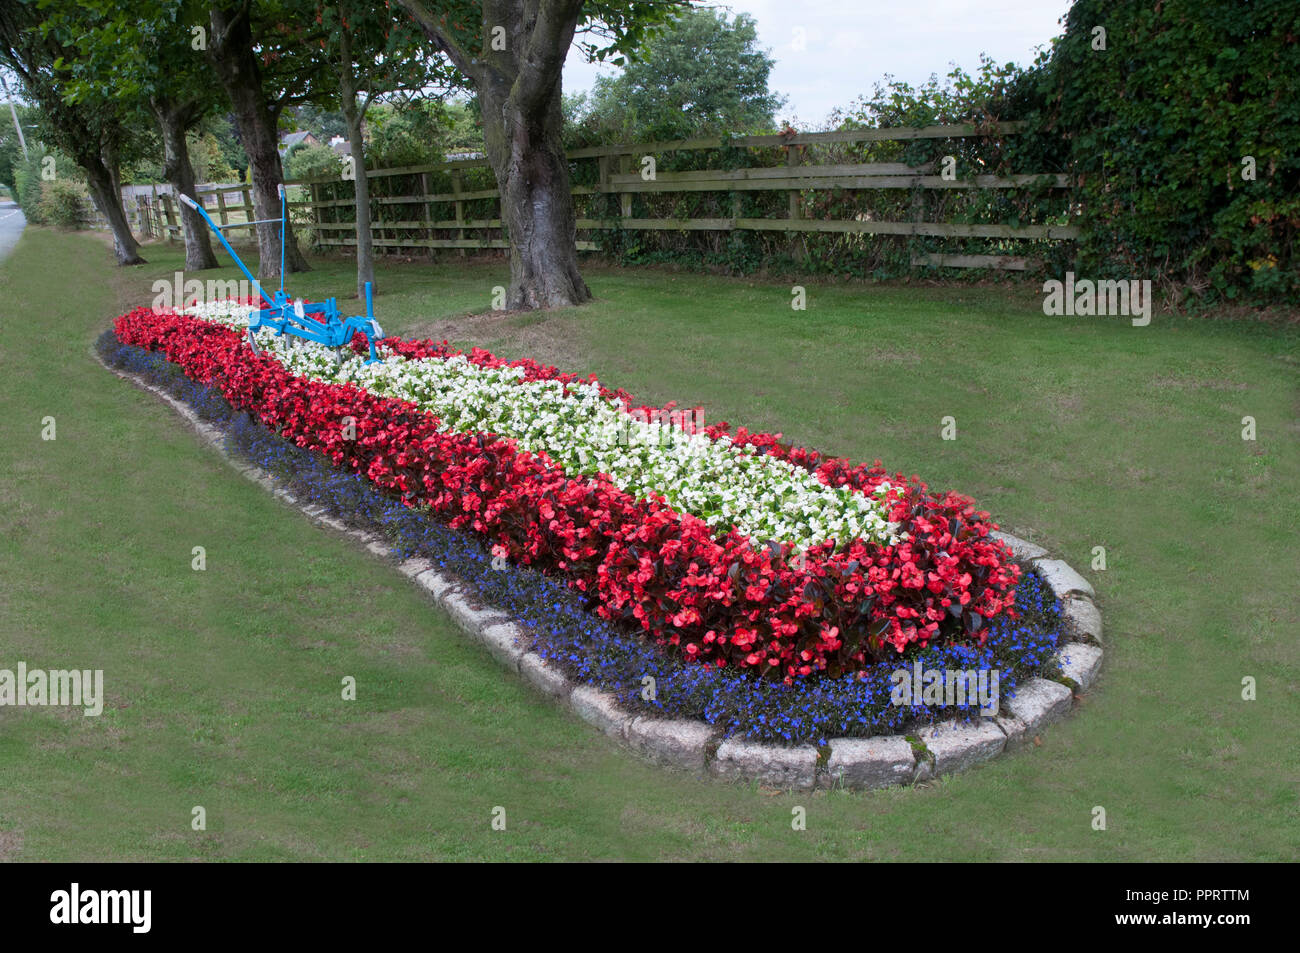 Roadside Flowerbed of Begonia semperflorens and blue lobelia with an agricultural implement as a center piece. Elswick village Lancashire England UK Stock Photo